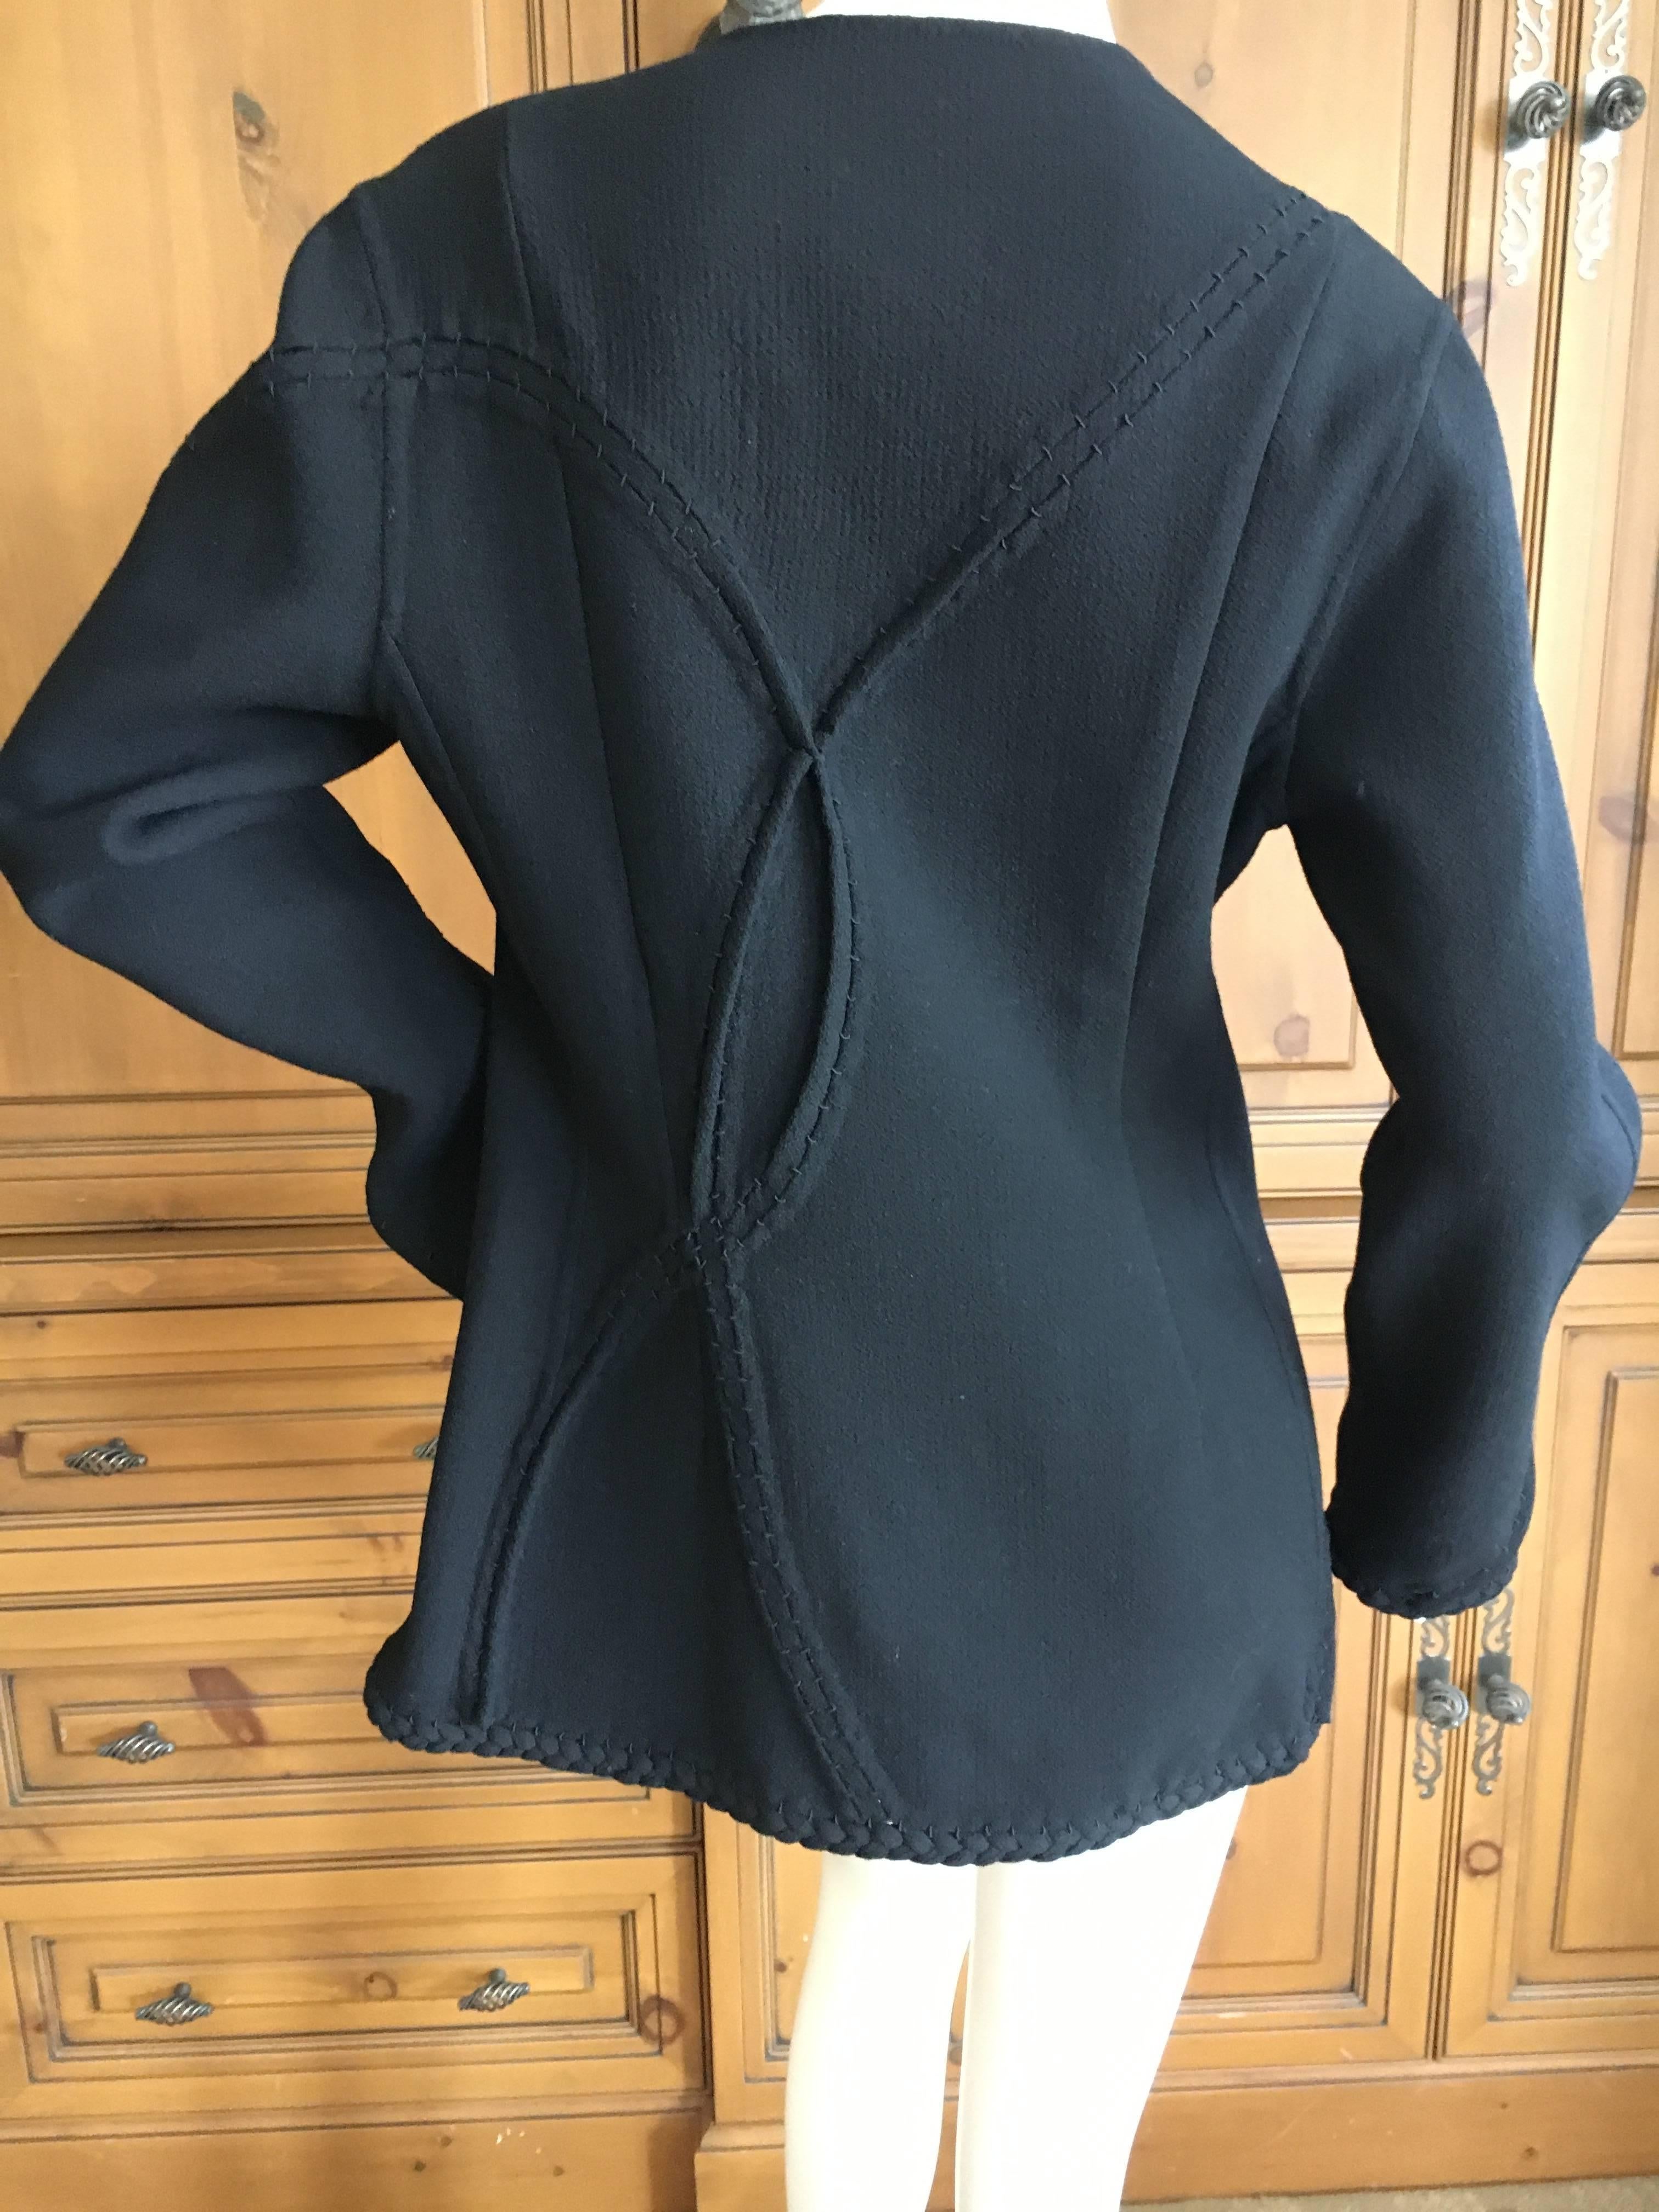 Chado Ralph Rucci Black Jacket with Woven Details For Sale 2